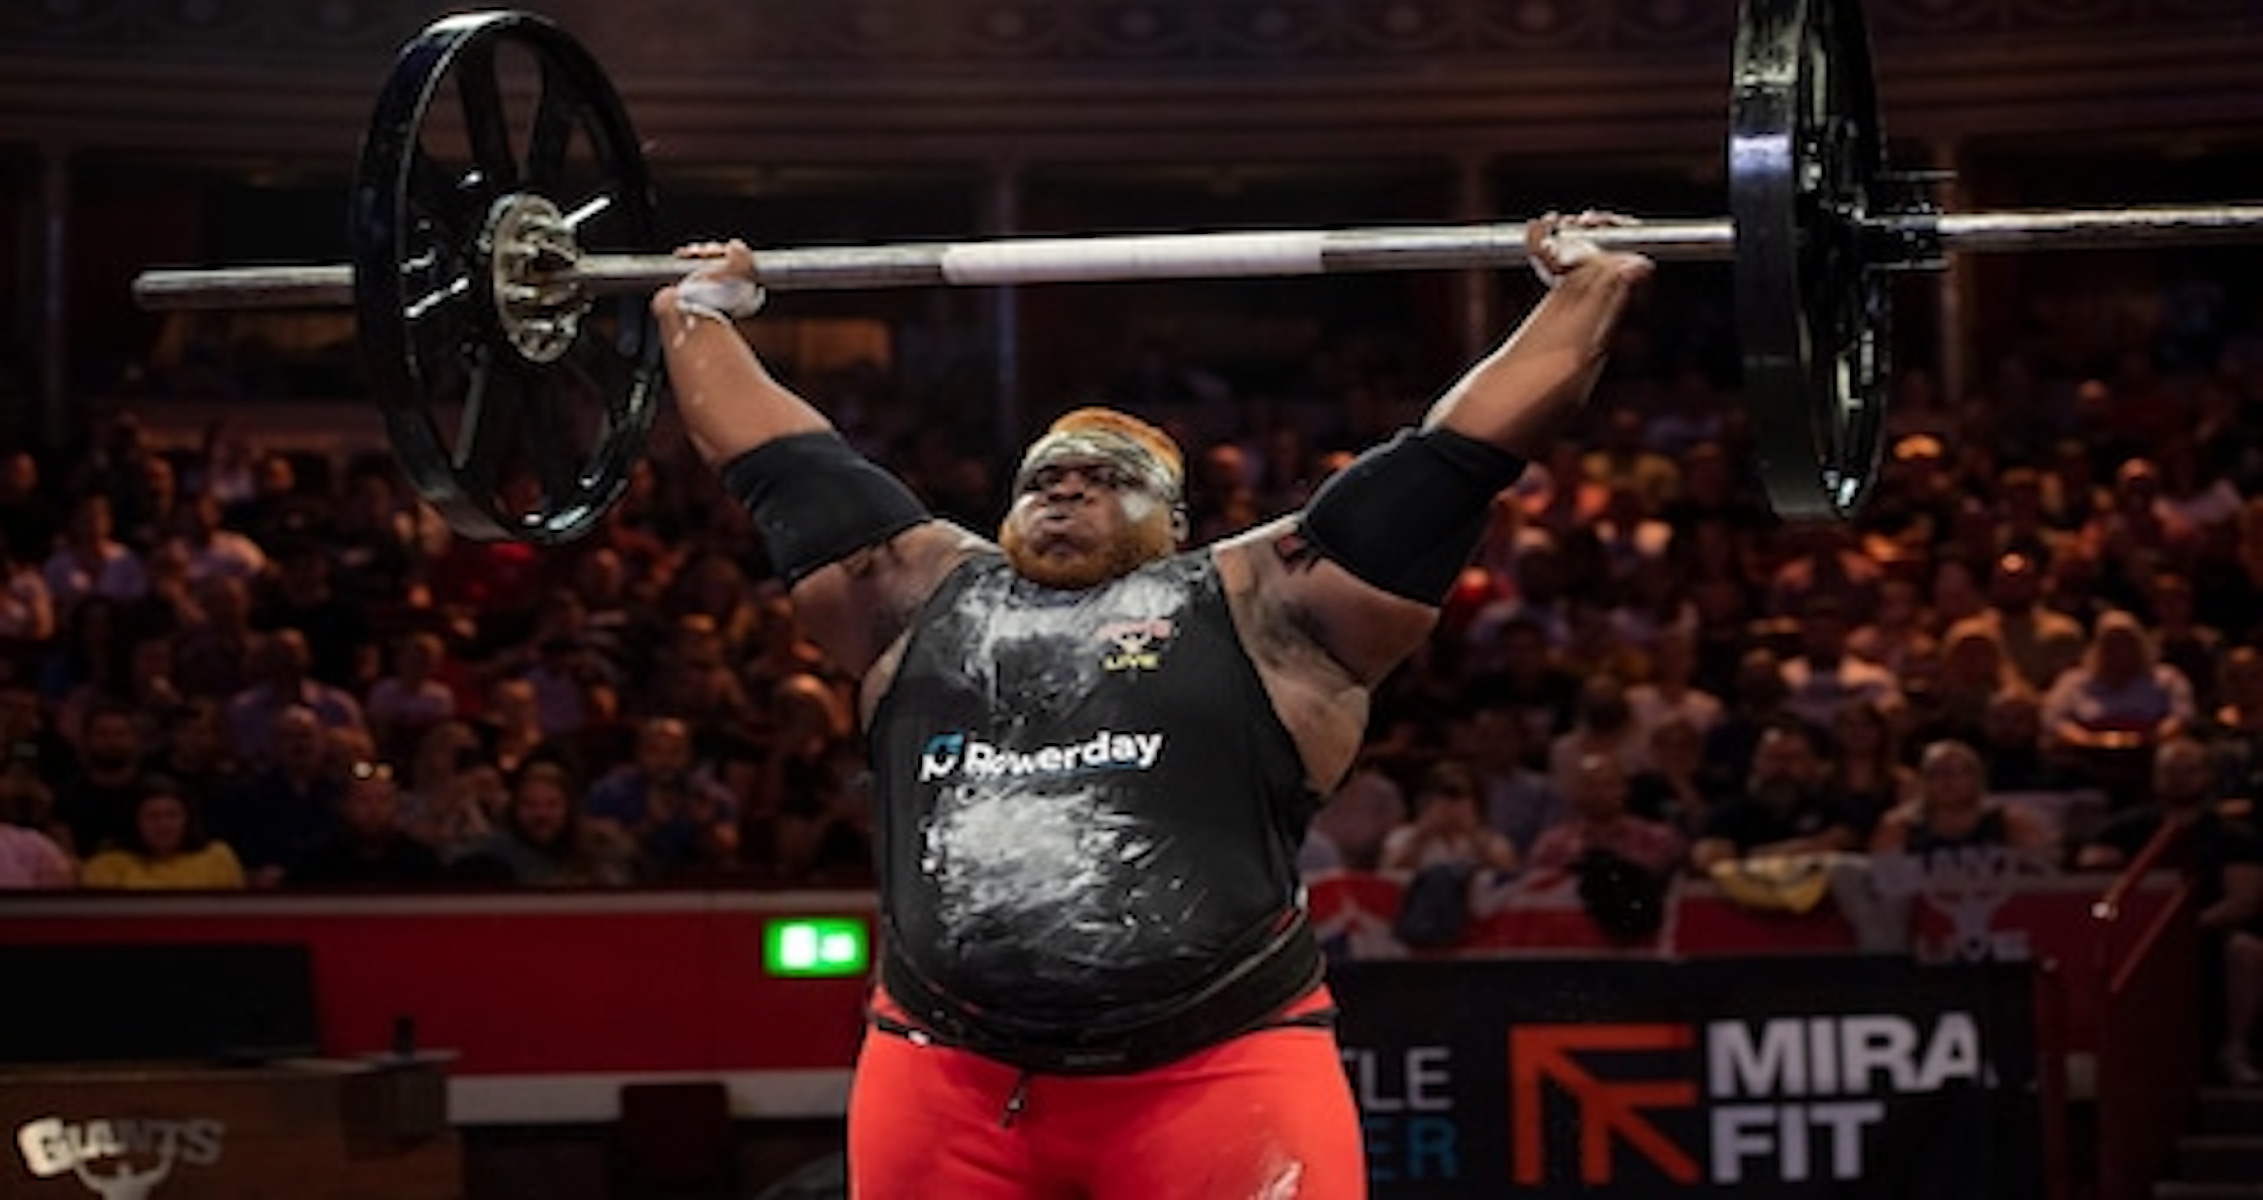 Iron Biby Sets New Axle Press World Record With 217kg Lift